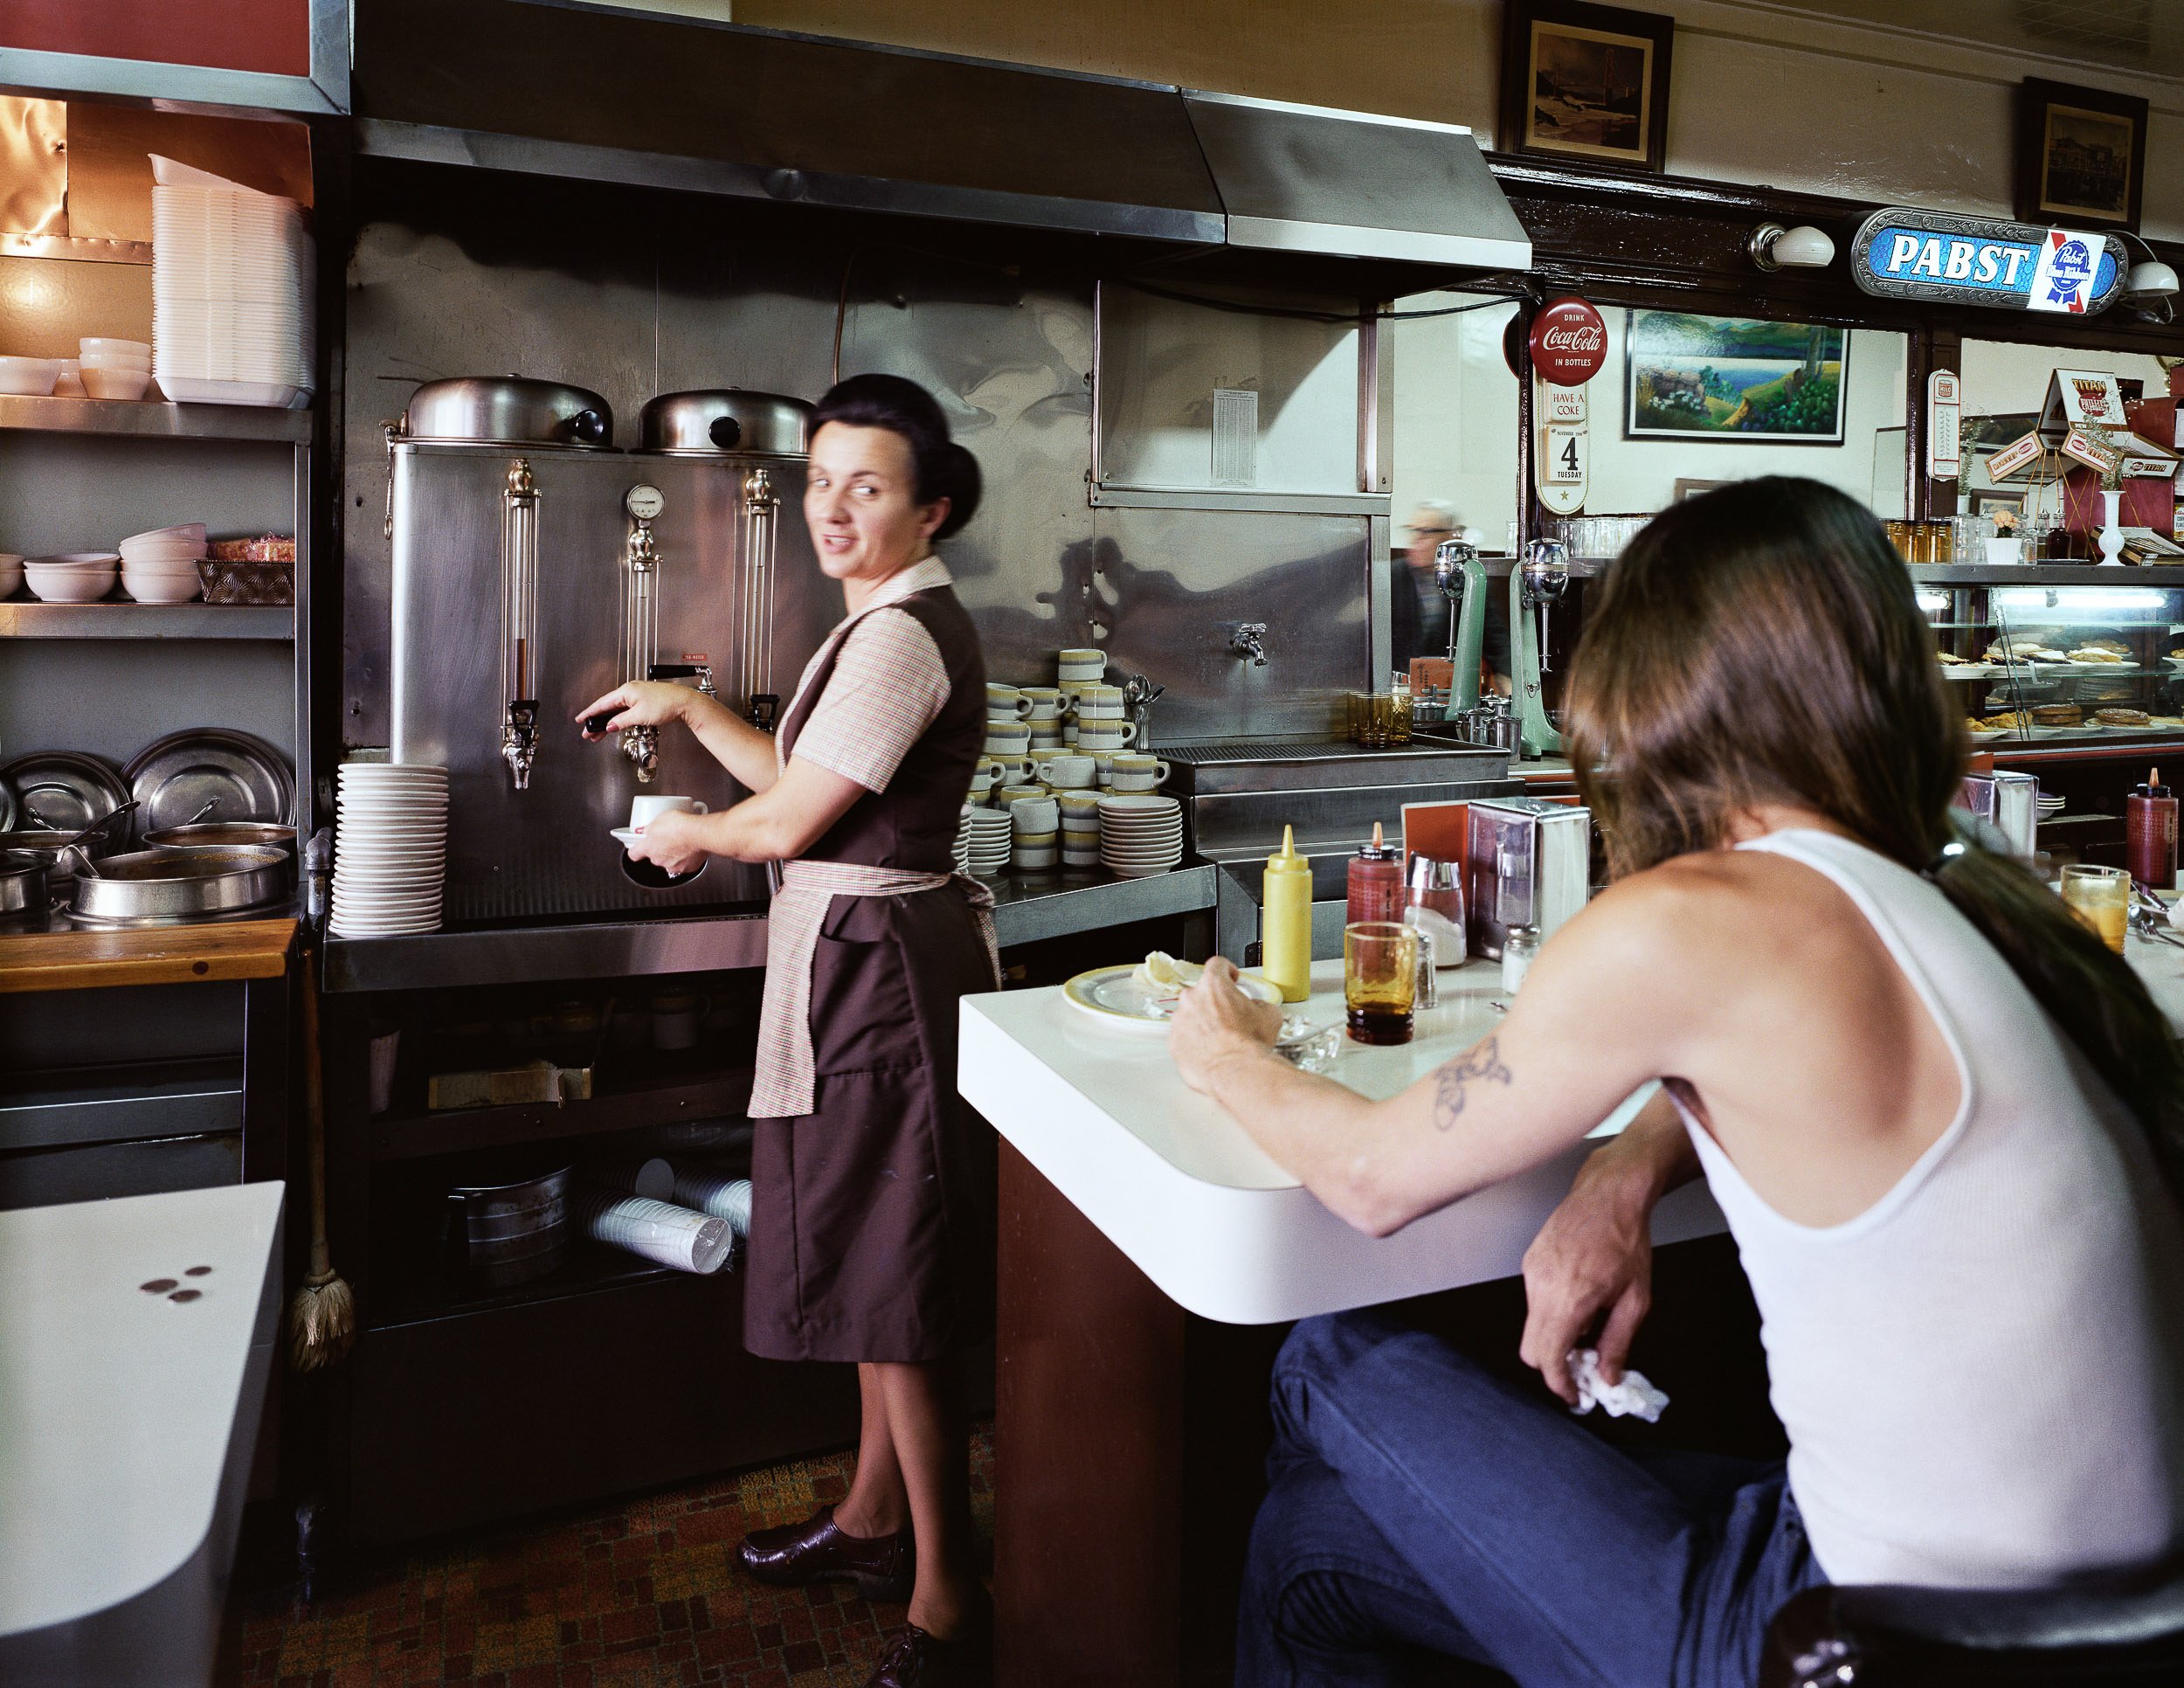   Pat Serving Coffee at the Gordon Cafe, 7th at Mission Street, 1980  